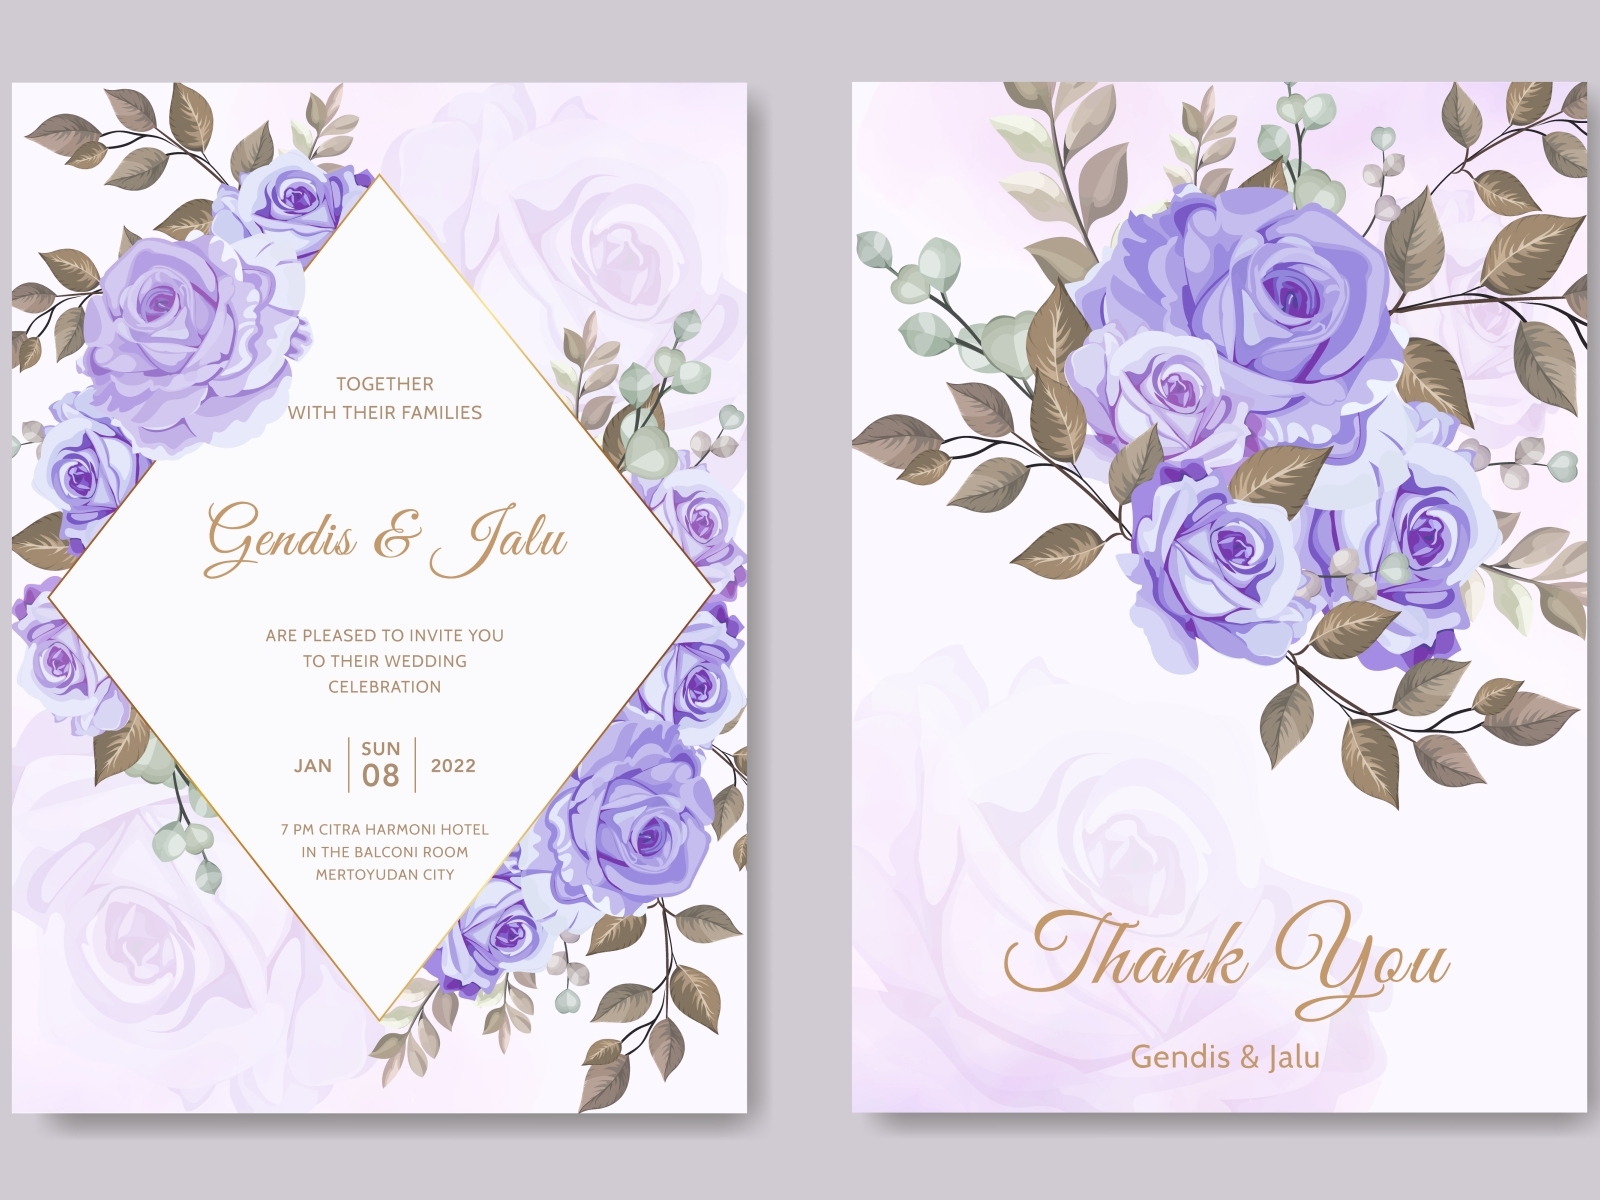 Wedding Invitation Card Template Purple Rose Flower By Andrias Robin Intended For Engagement Invitation Card Template